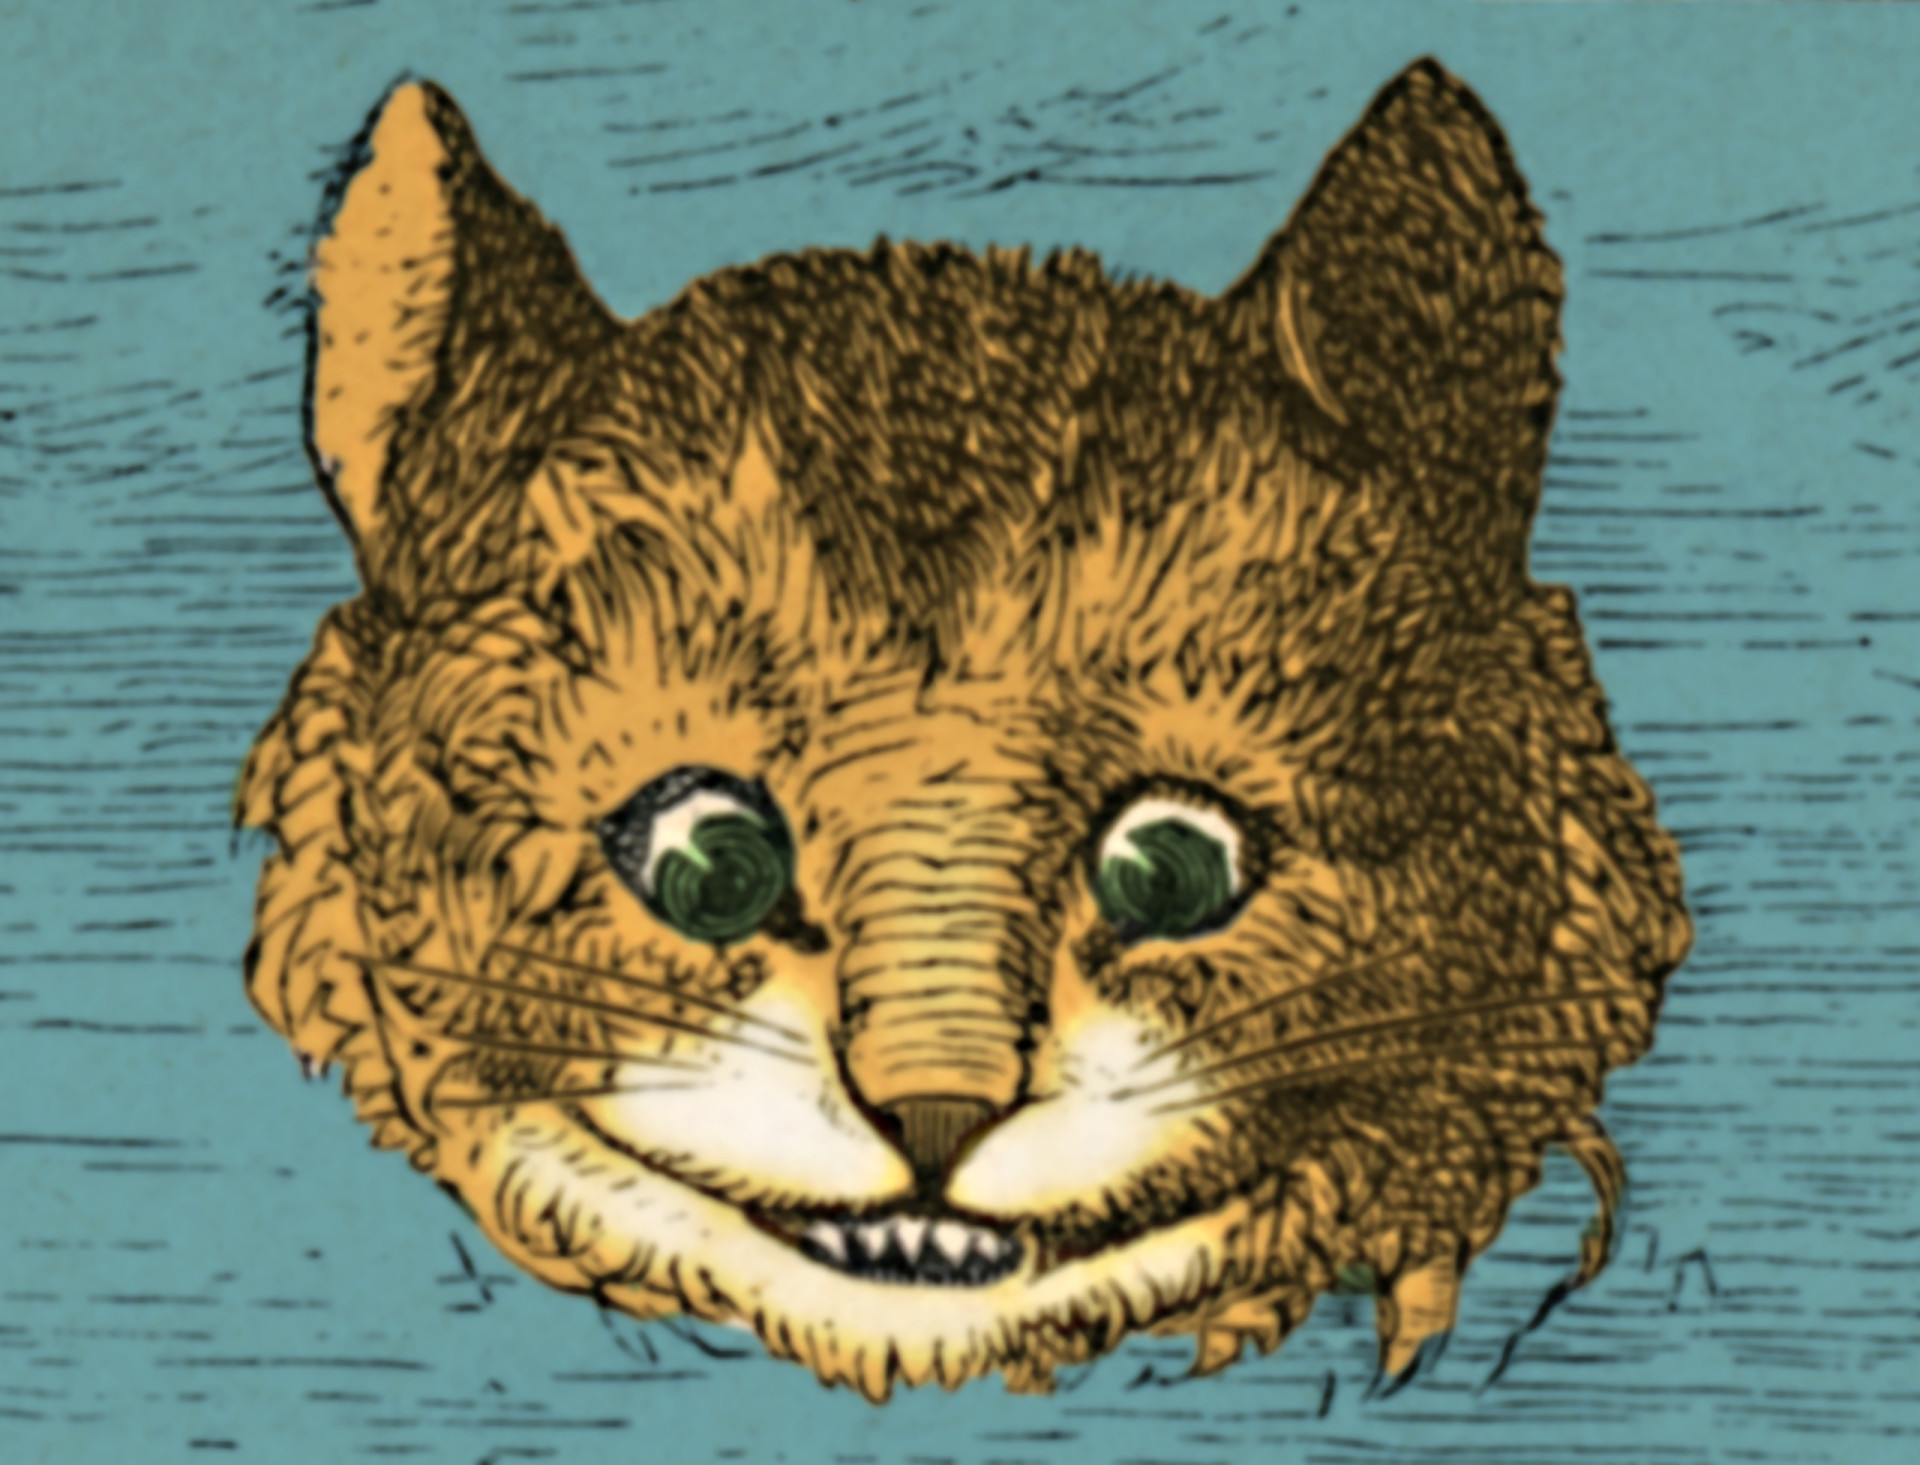 <p>The cat is known for its distinctive mischievous grin. "To grin like a Cheshire Cat" was a common phrase in Carroll's day. Its origin is unknown, but it could well be an alteration of "cheeser cat"—a cat very fond of cheese. Today, when we are told to say cheese, it's to induce a smile or a grin for a photograph.</p><p><a href="https://www.msn.com/en-us/community/channel/vid-7xx8mnucu55yw63we9va2gwr7uihbxwc68fxqp25x6tg4ftibpra?cvid=94631541bc0f4f89bfd59158d696ad7e">Follow us and access great exclusive content every day</a></p>